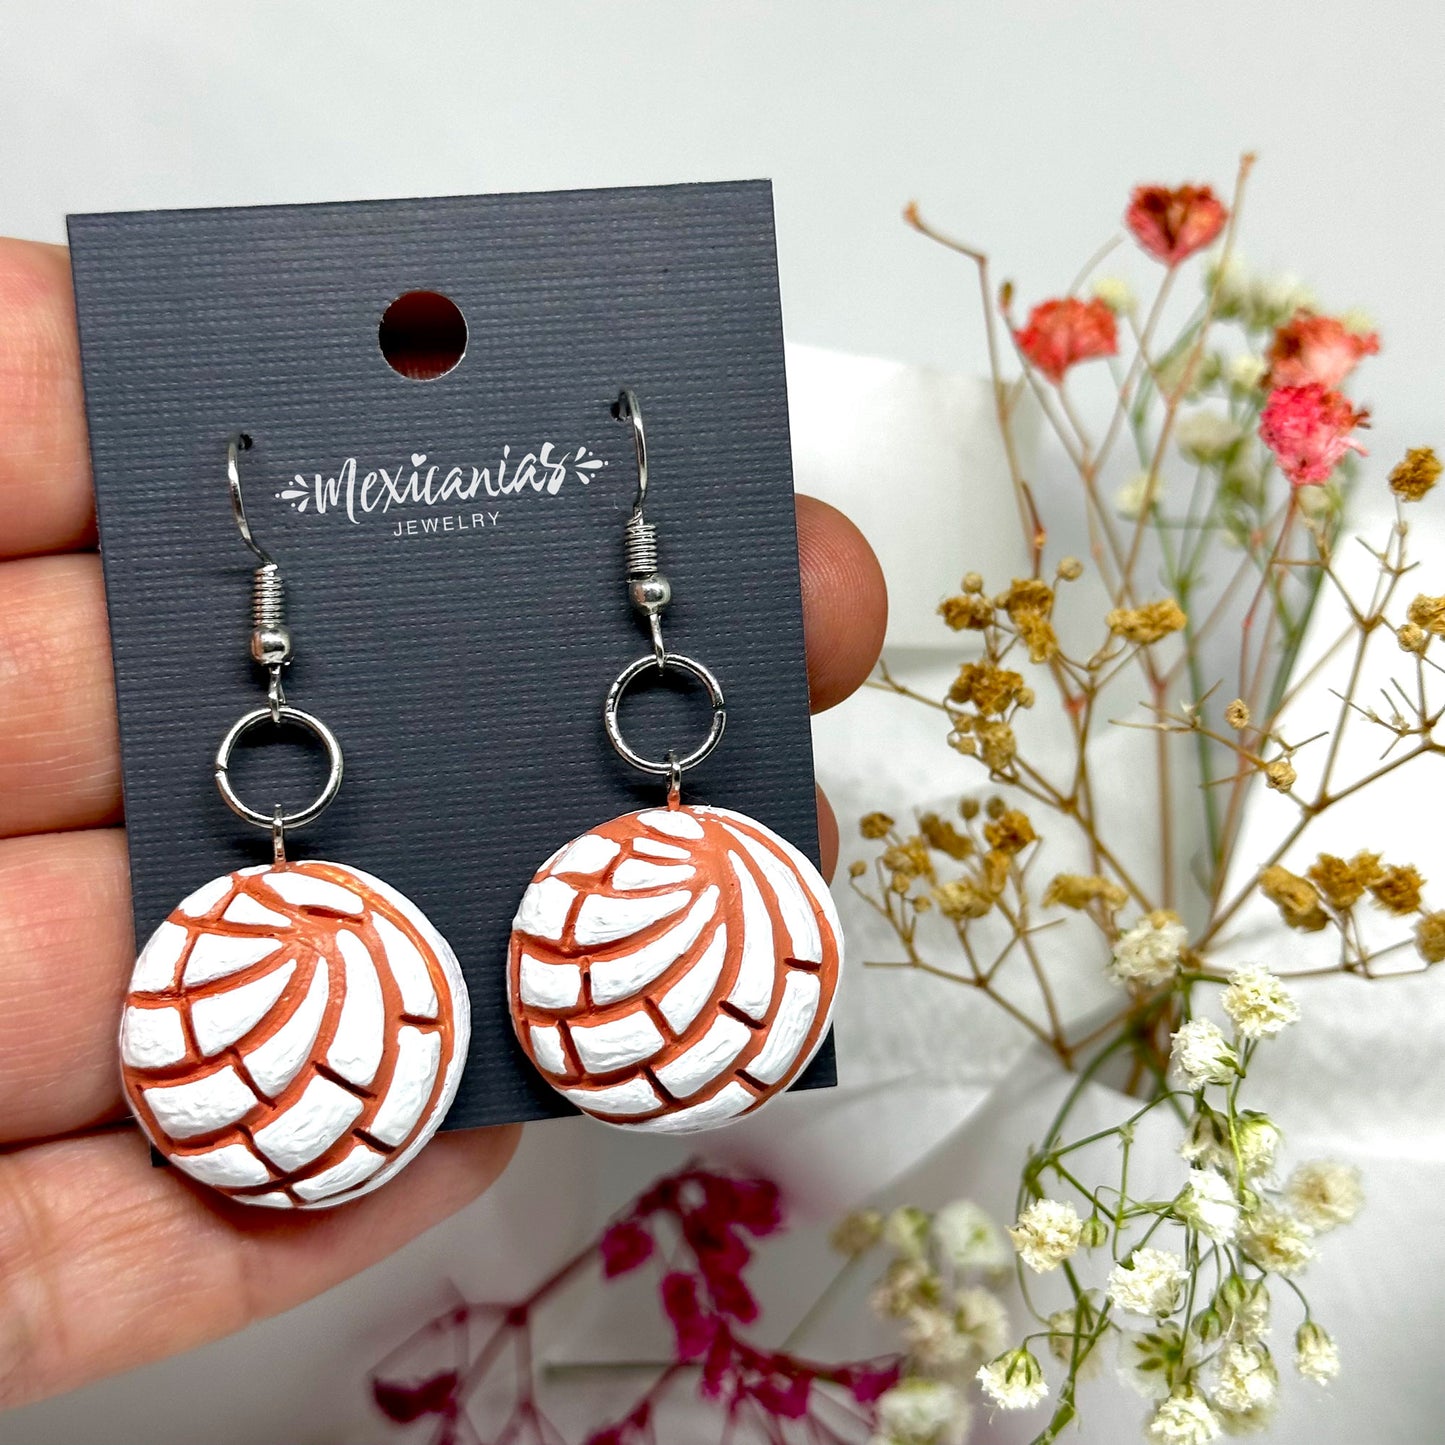 White vanilla concha earrings handmade clay conchitas earrings Mexican pan dulce inspired food jewelry for women and girls for Frida Kahlo fans and sweet bread concha earrings lovers and Mexico folk art Mexican jewelry